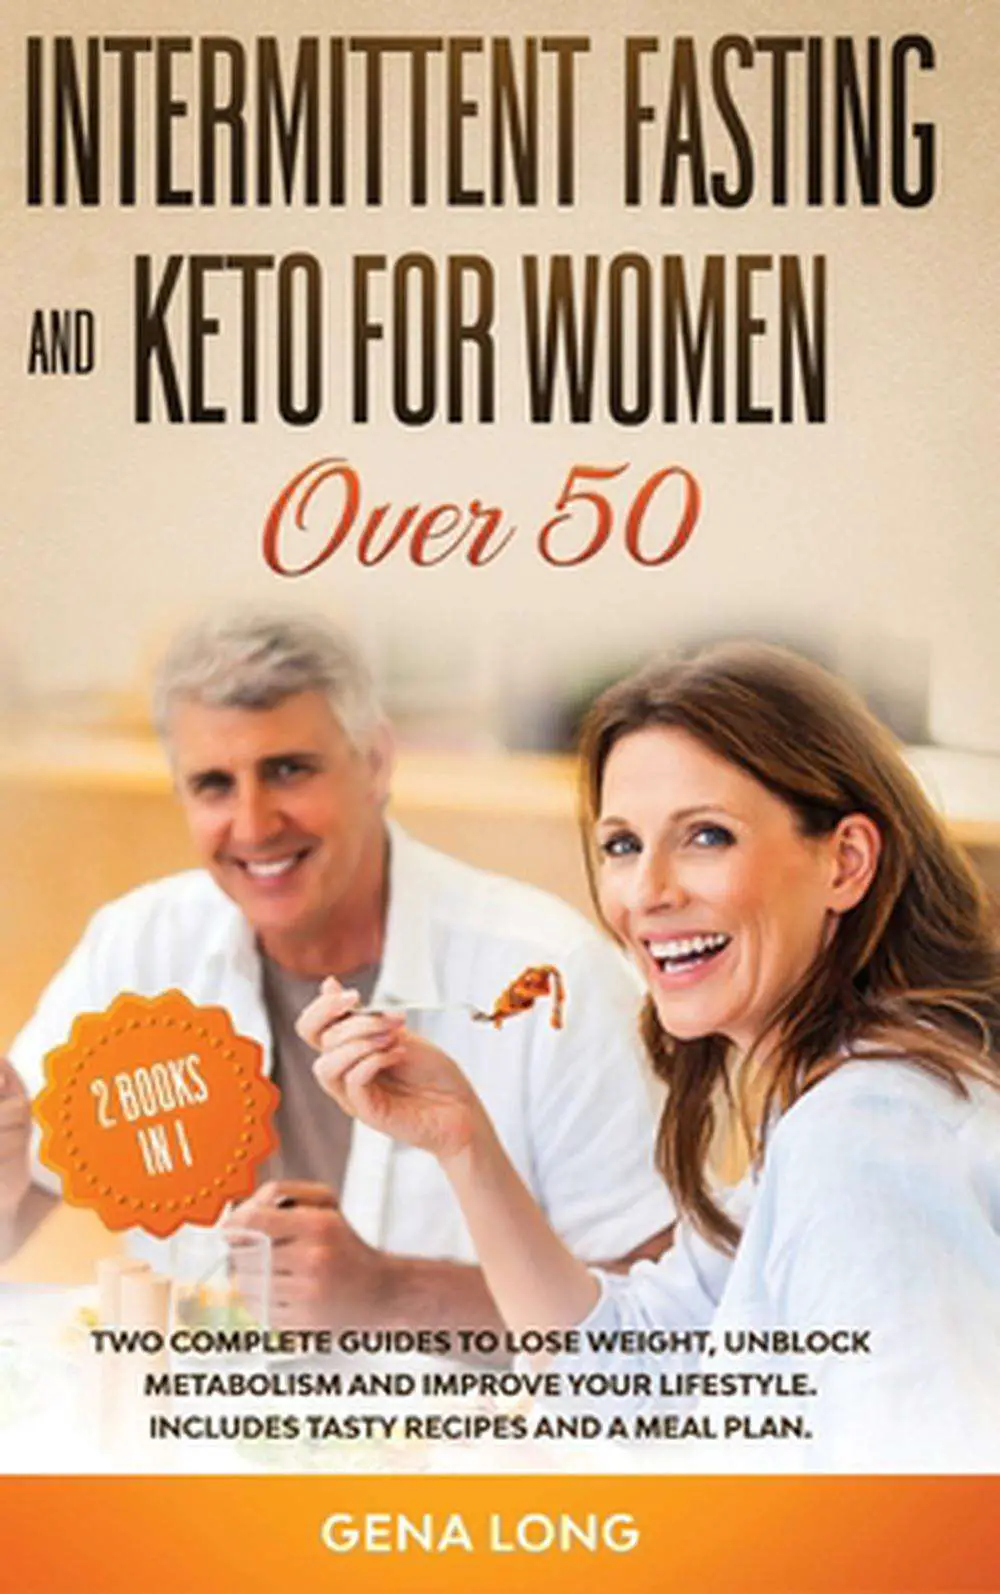 Intermittent Fasting and Keto for Women Over 50 by Gena Long Hardcover ...